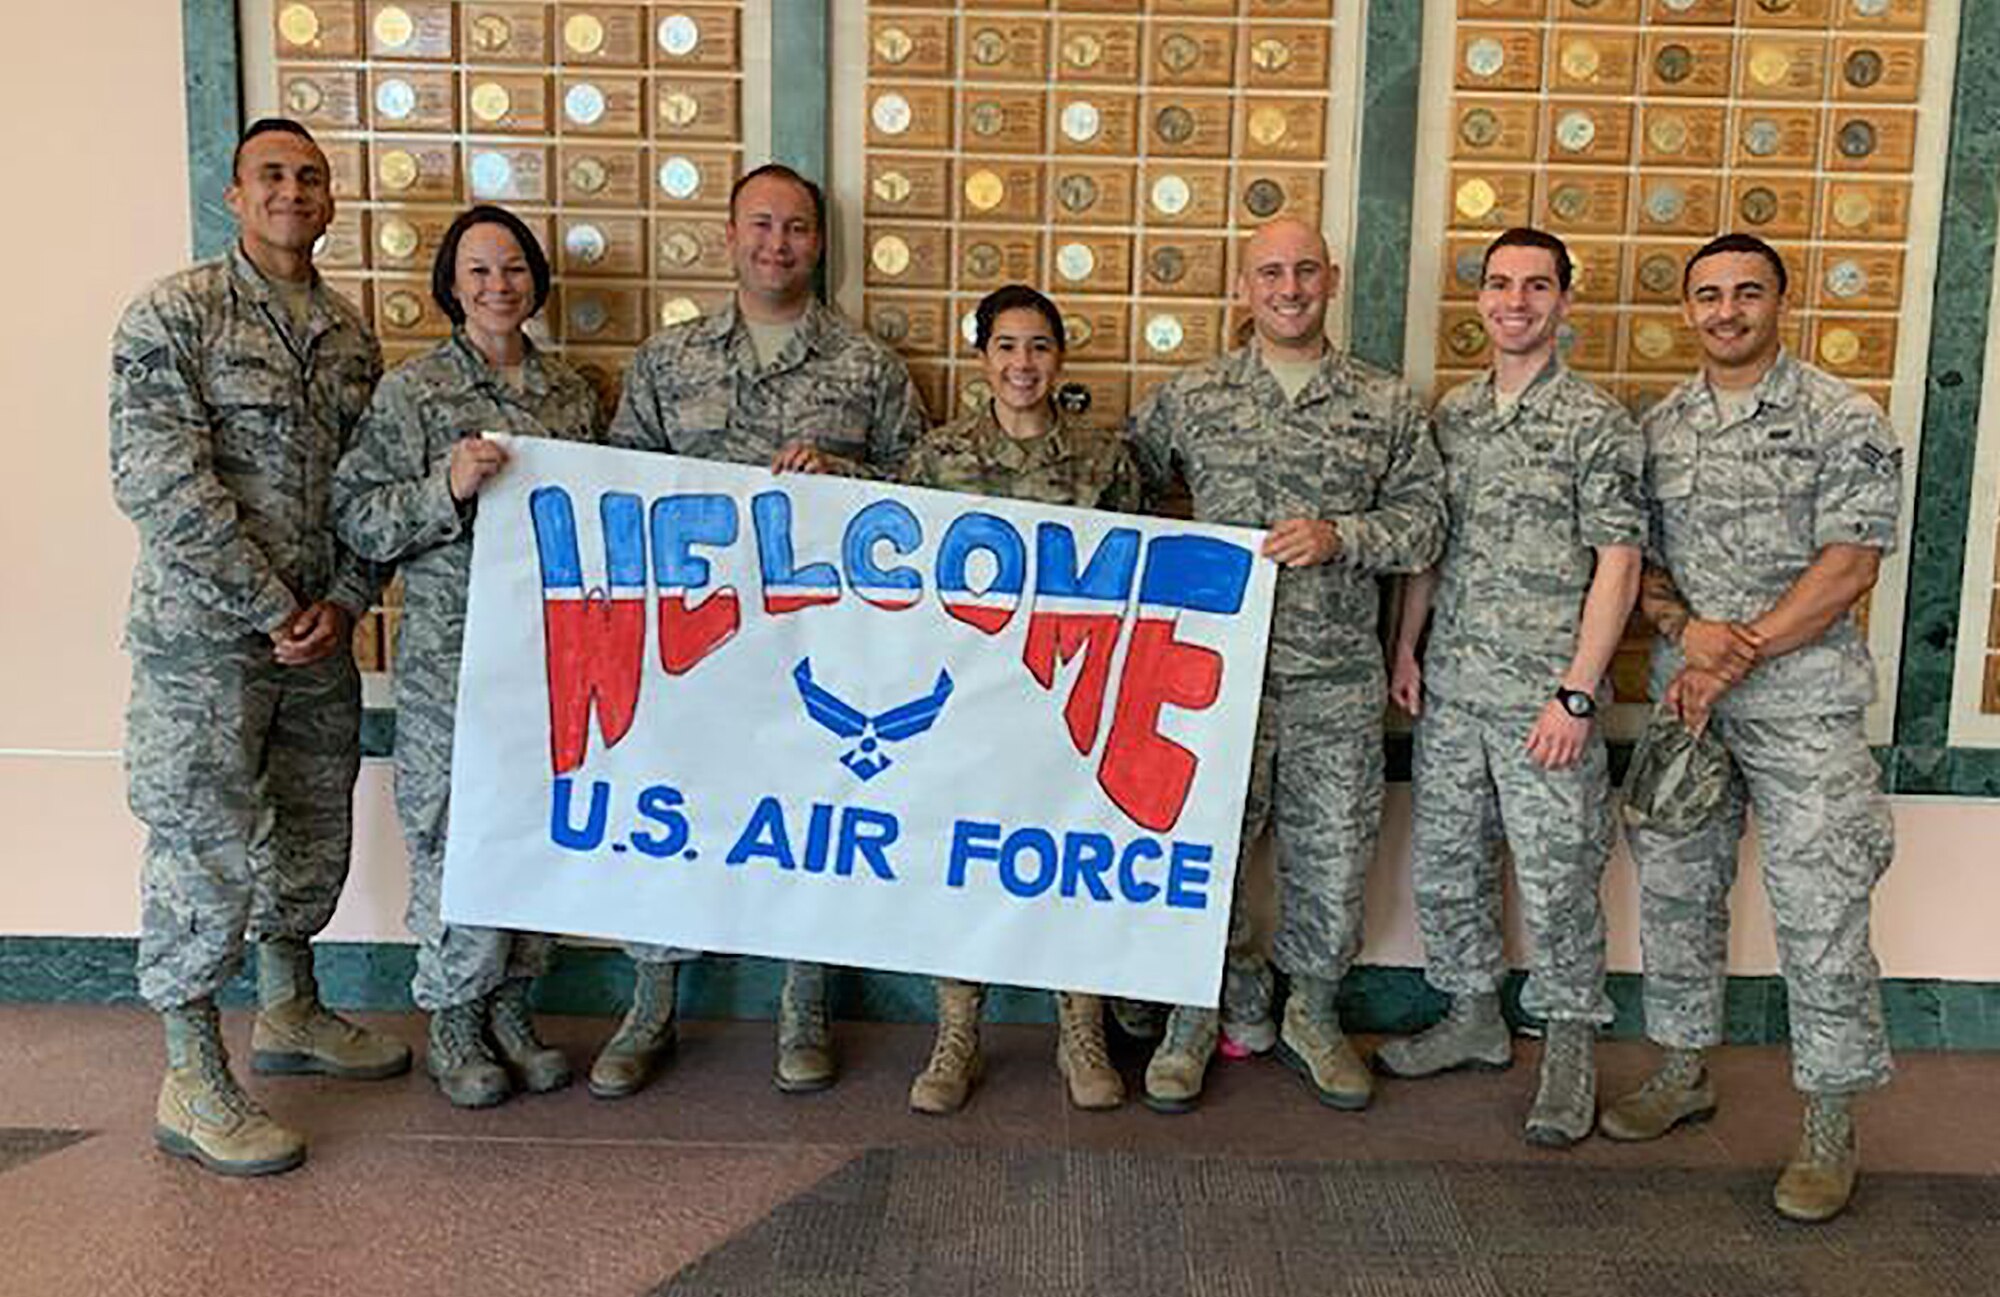 (left to right) Senior Airman Carter, Master Sgt. Kelly, Tech. Sgt. Nicoletti, Senior Airman Faur, Senior Airman Greene, Tech. Sgt. Schnetz and Senior Airman Mitchell, Reserve Citizen Airmen from the 655th Intelligence, Surveillance and Reconnaissance Wing, 50th Intelligence Squadron, hold a sign created by patients of Shriners Children’s Hospital.